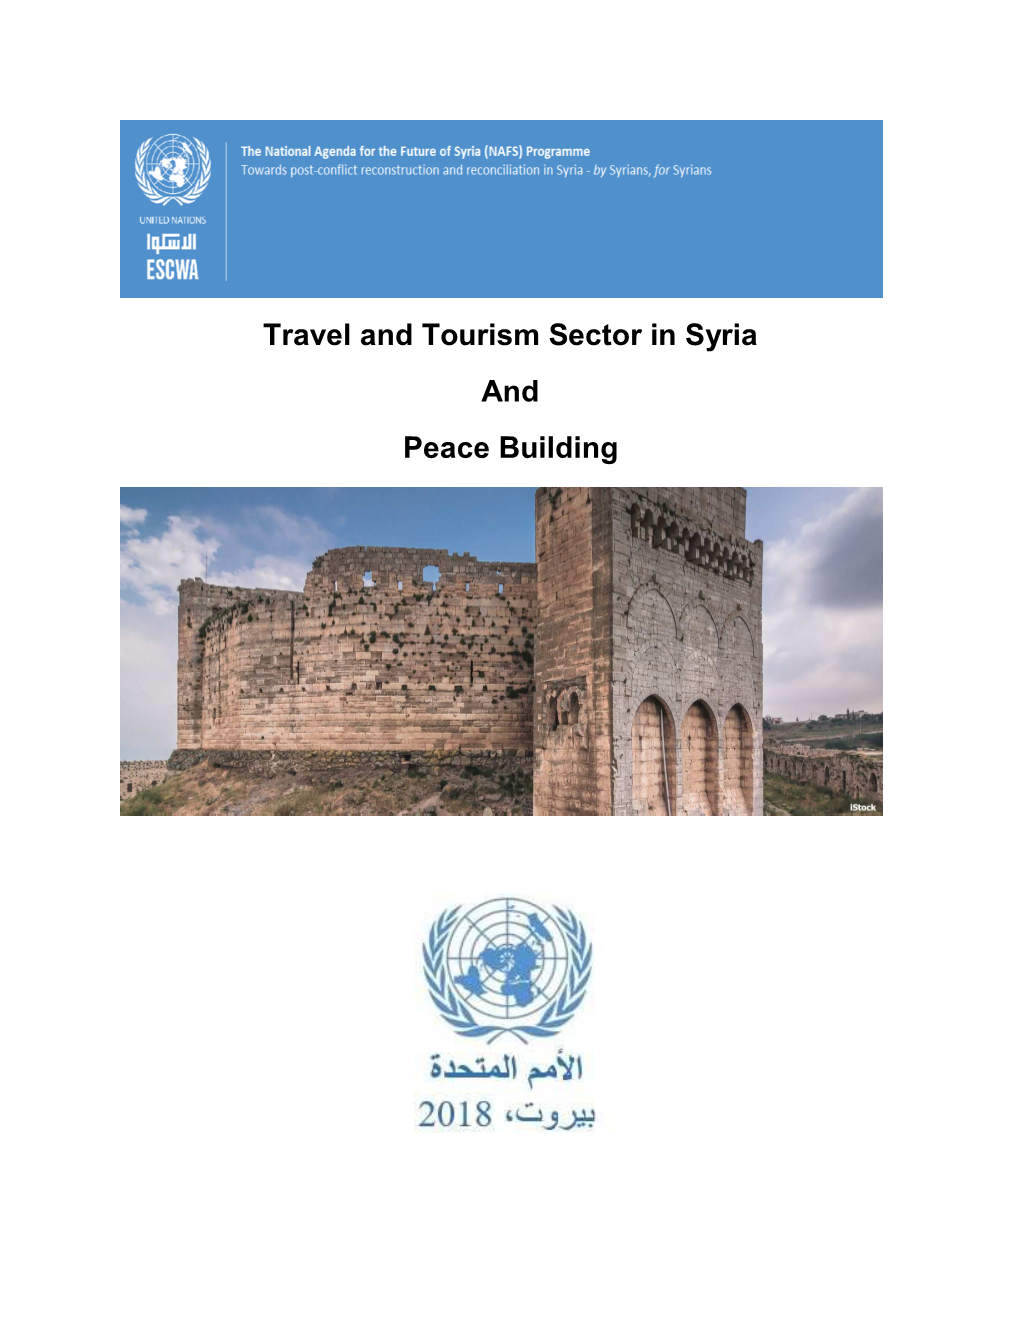 Travel and Tourism Sector in Syria and Peace Building